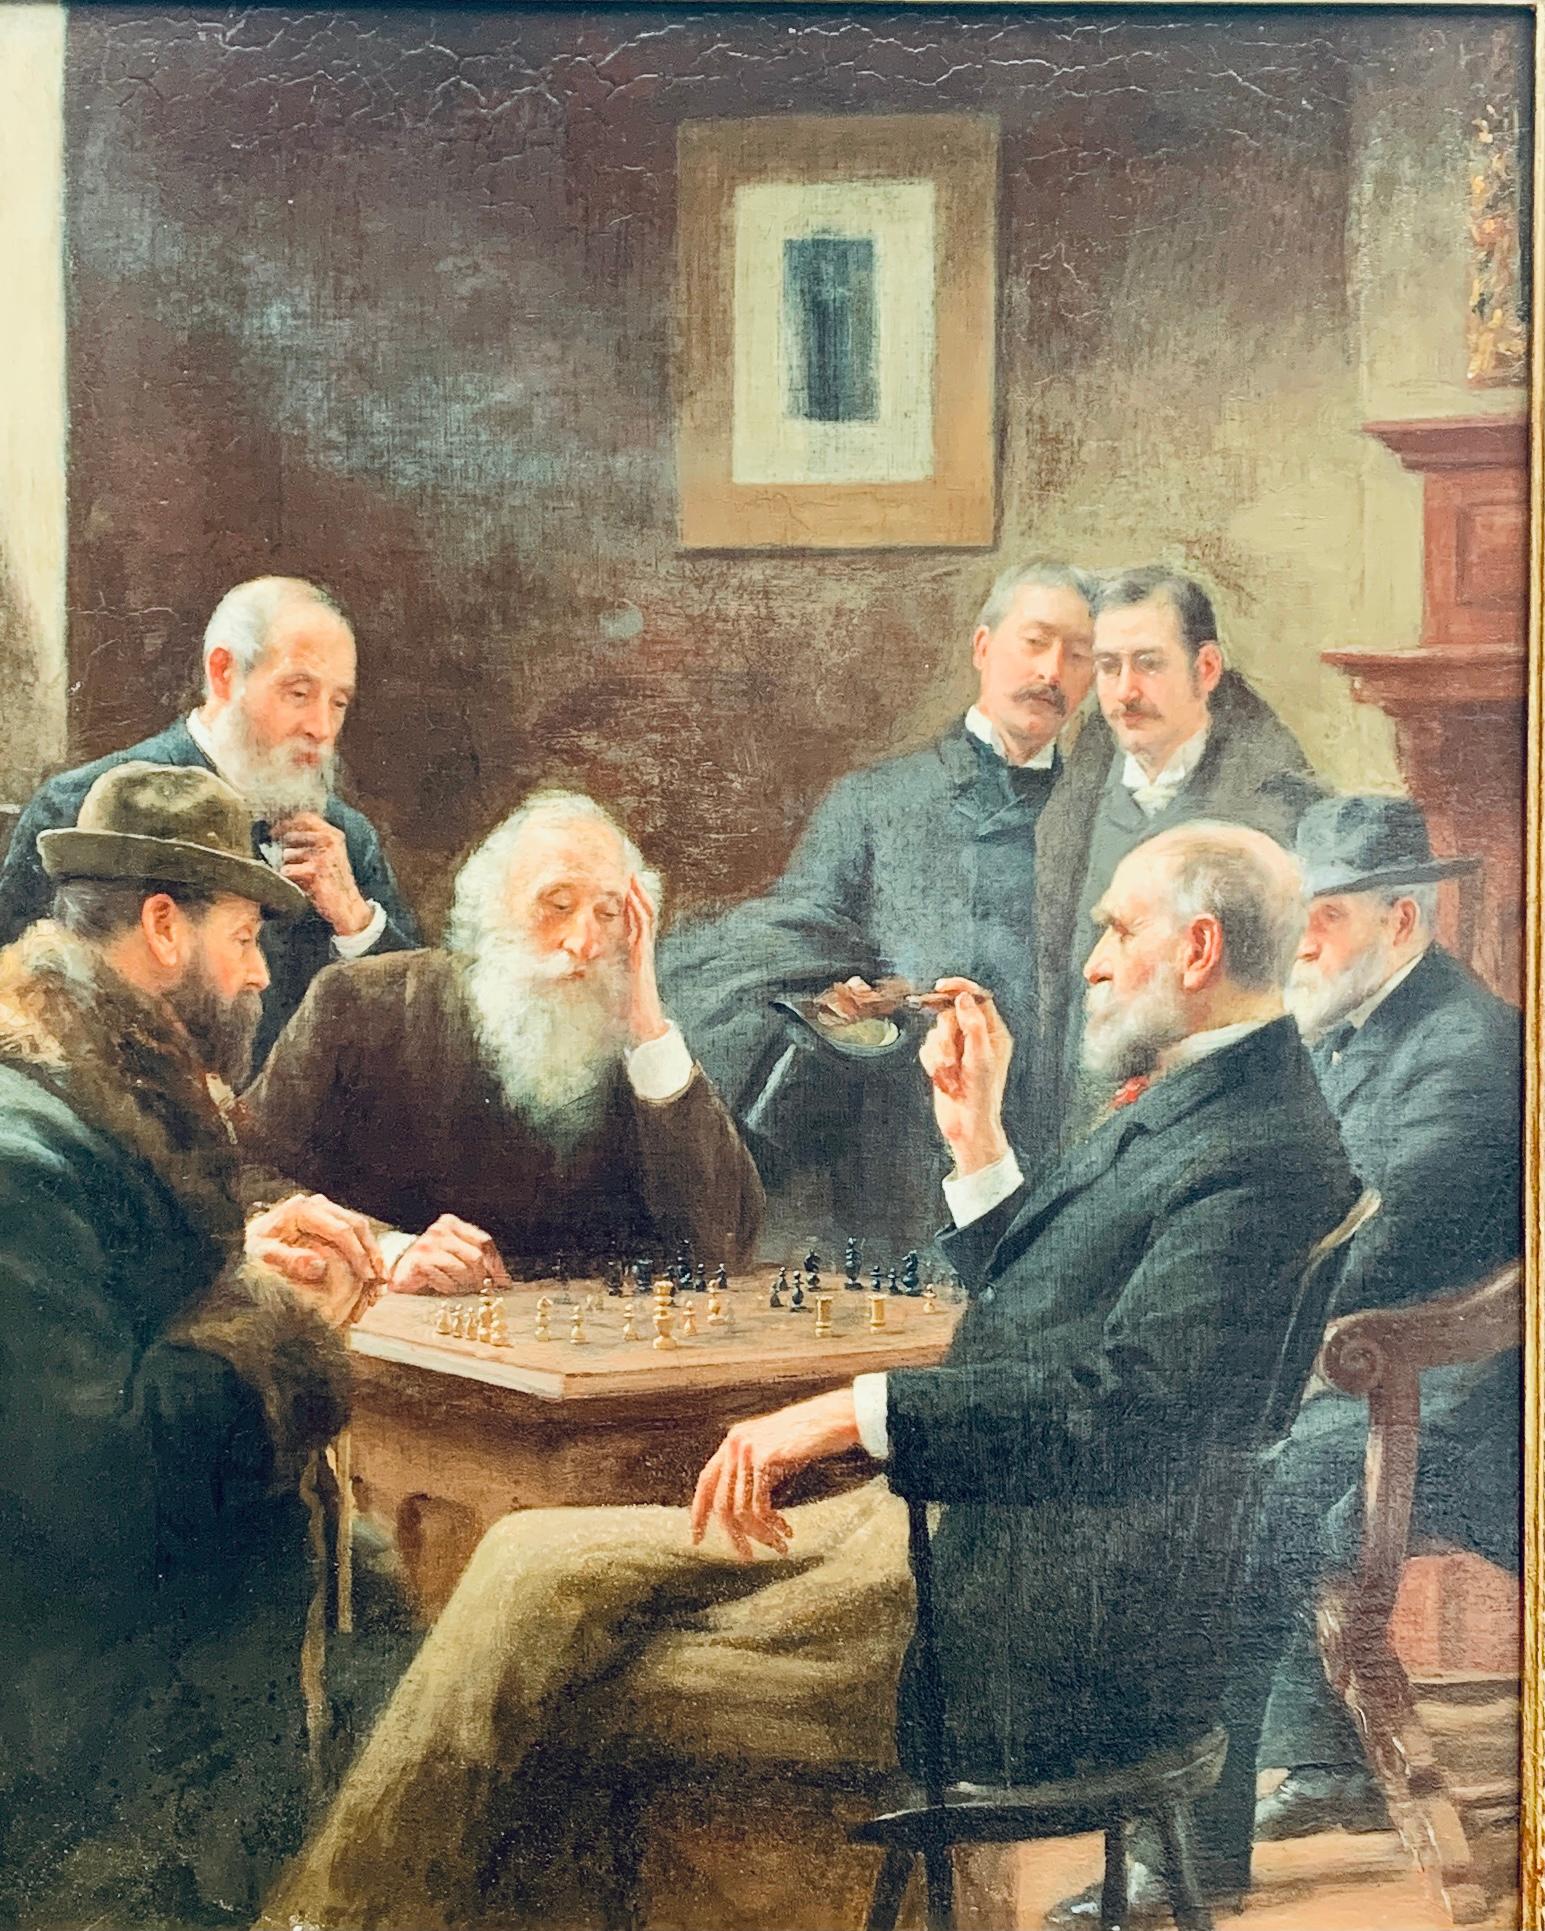 19th century American or European, Interior portrait of rich men playing chess - Painting by Unknown